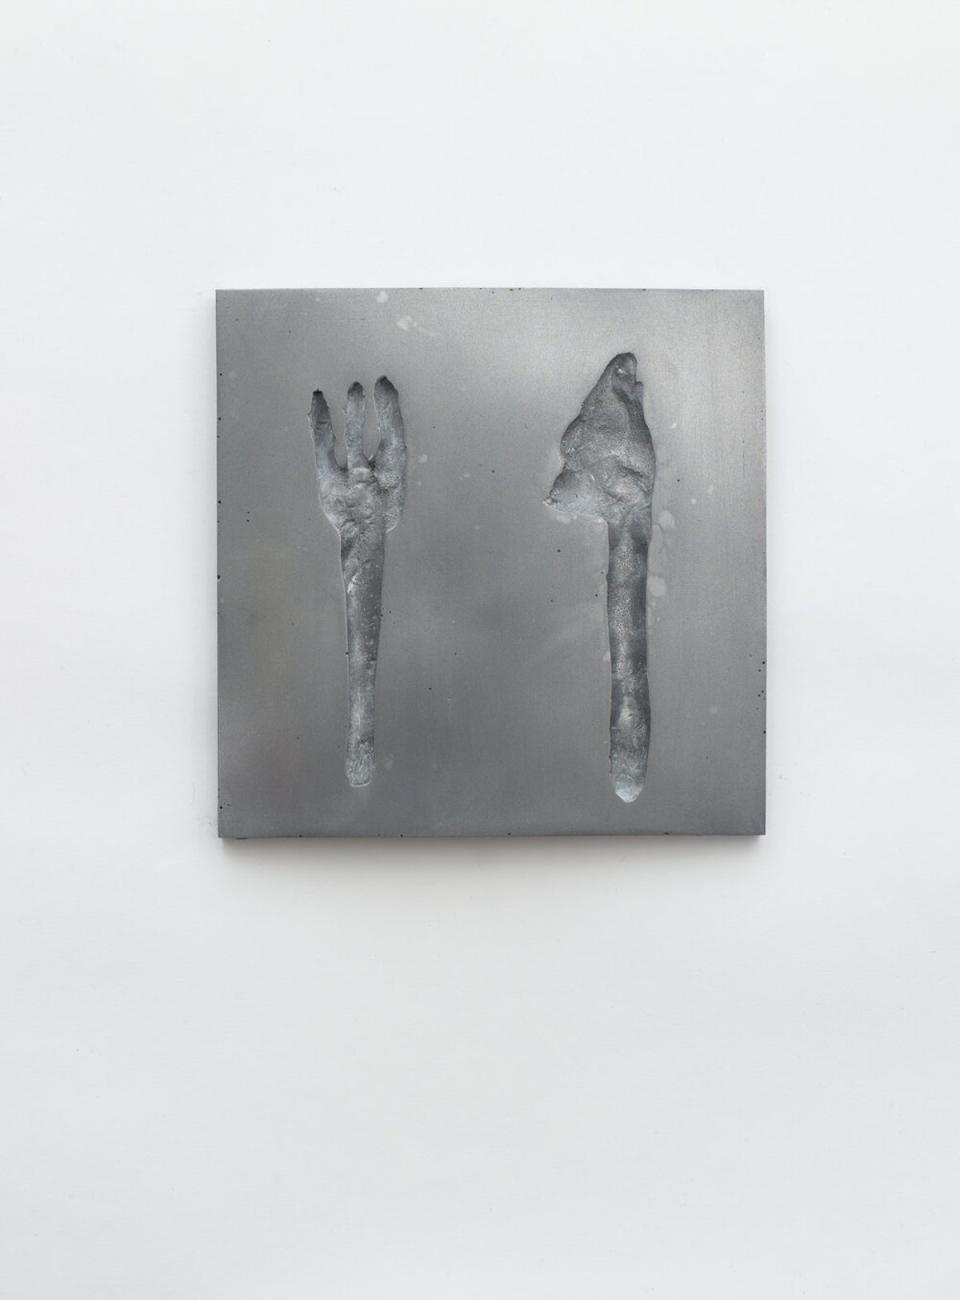 Lucy Page's jesmonite tiles are available through Wondering People (Lucy Page)